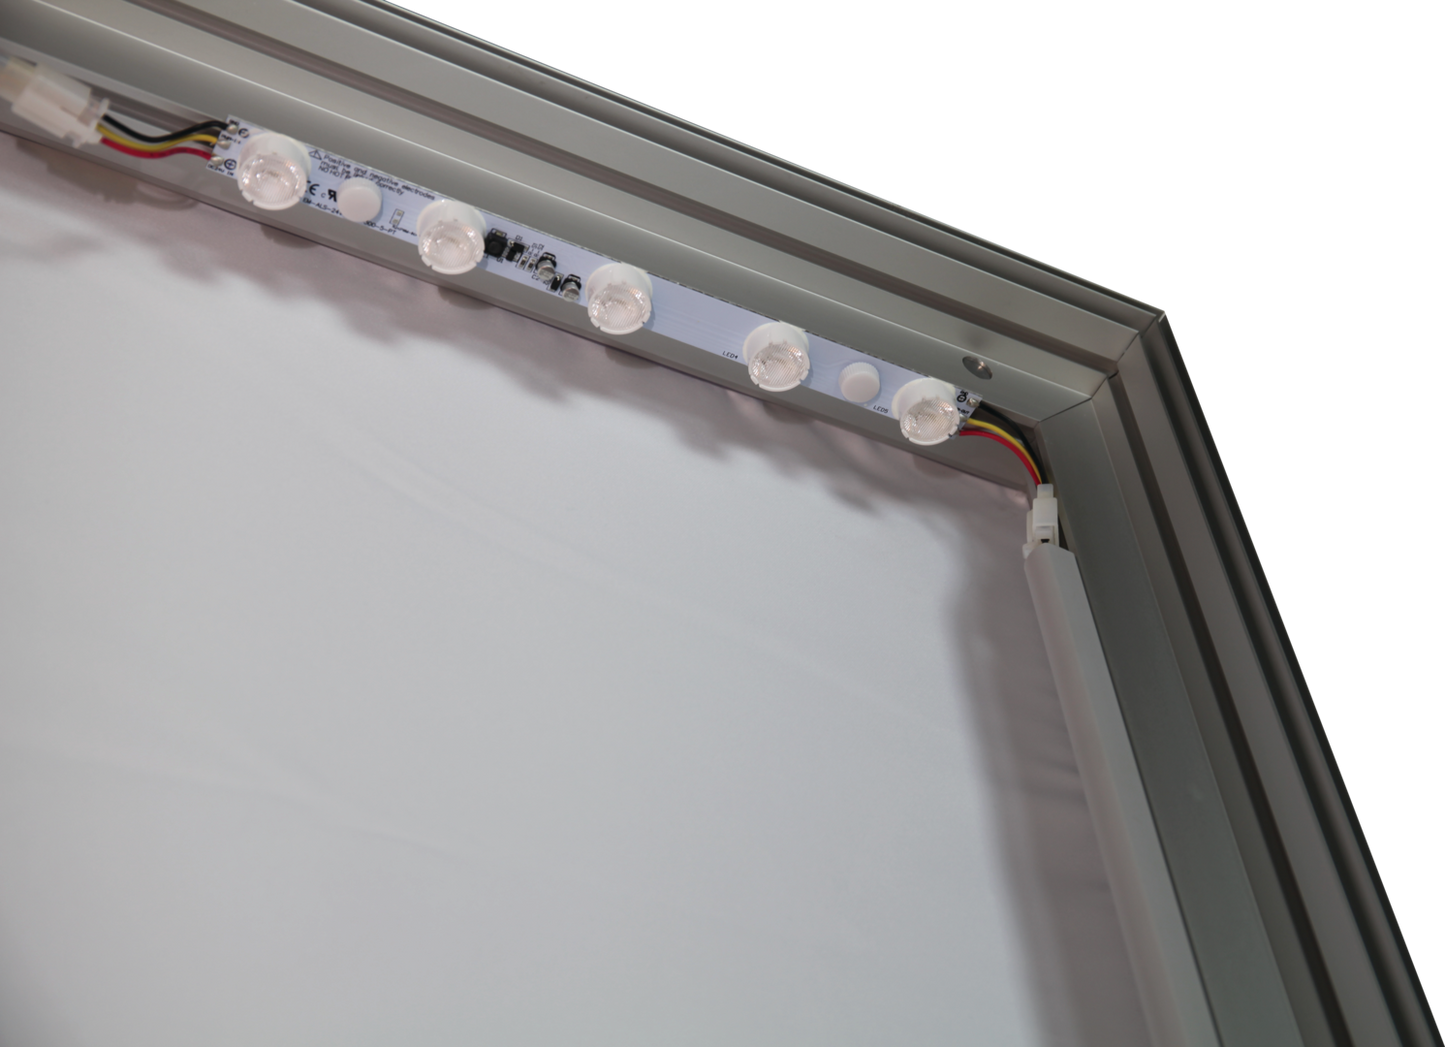 30ft x 4ft Vector Frame Hanging Light Box Double-Sided (Graphic Only)